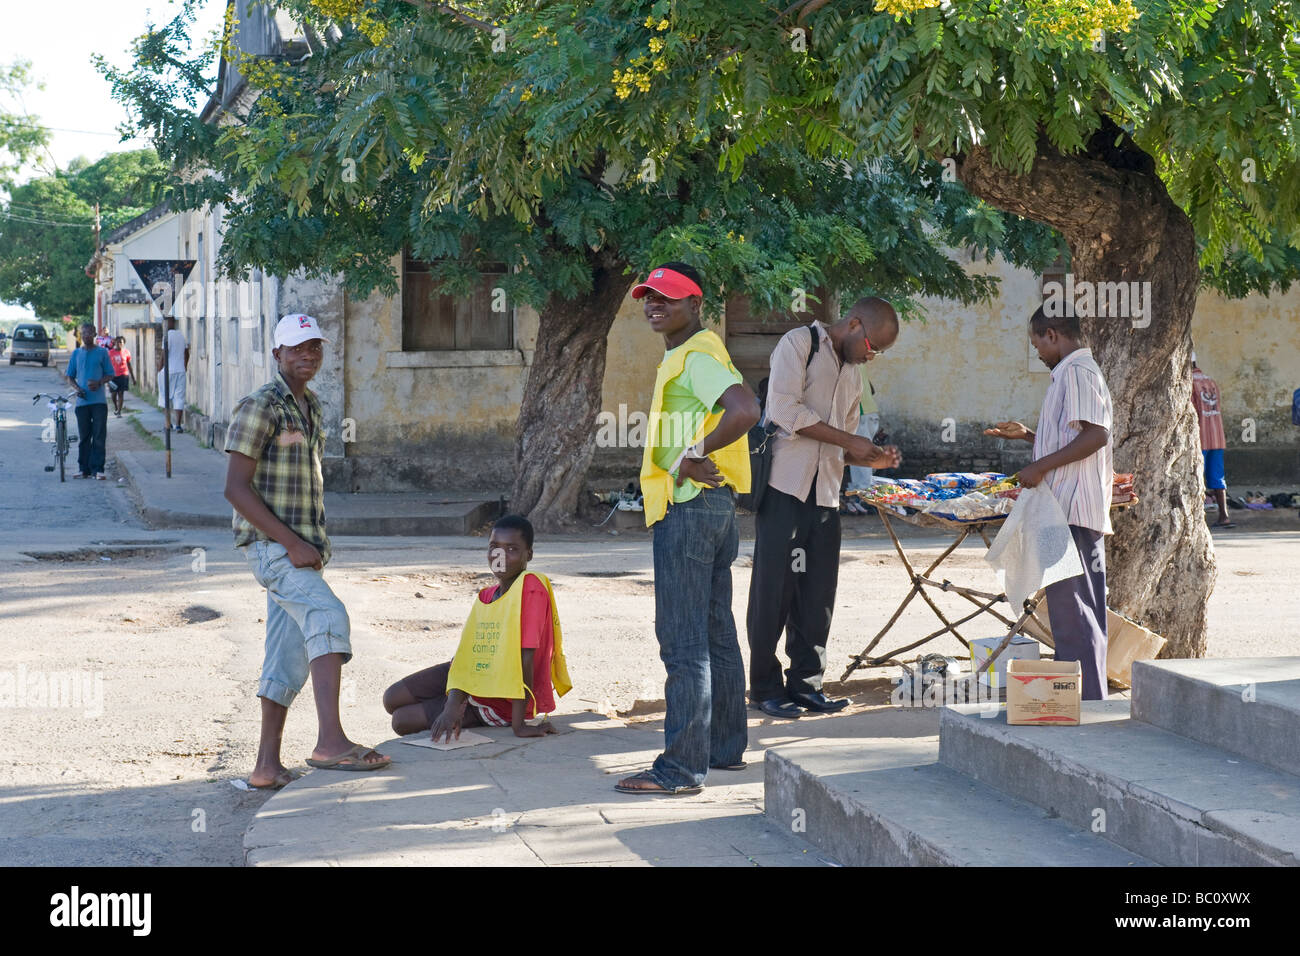 Street hawkers selling talk time for mobile phones Quelimane Mozambique Stock Photo